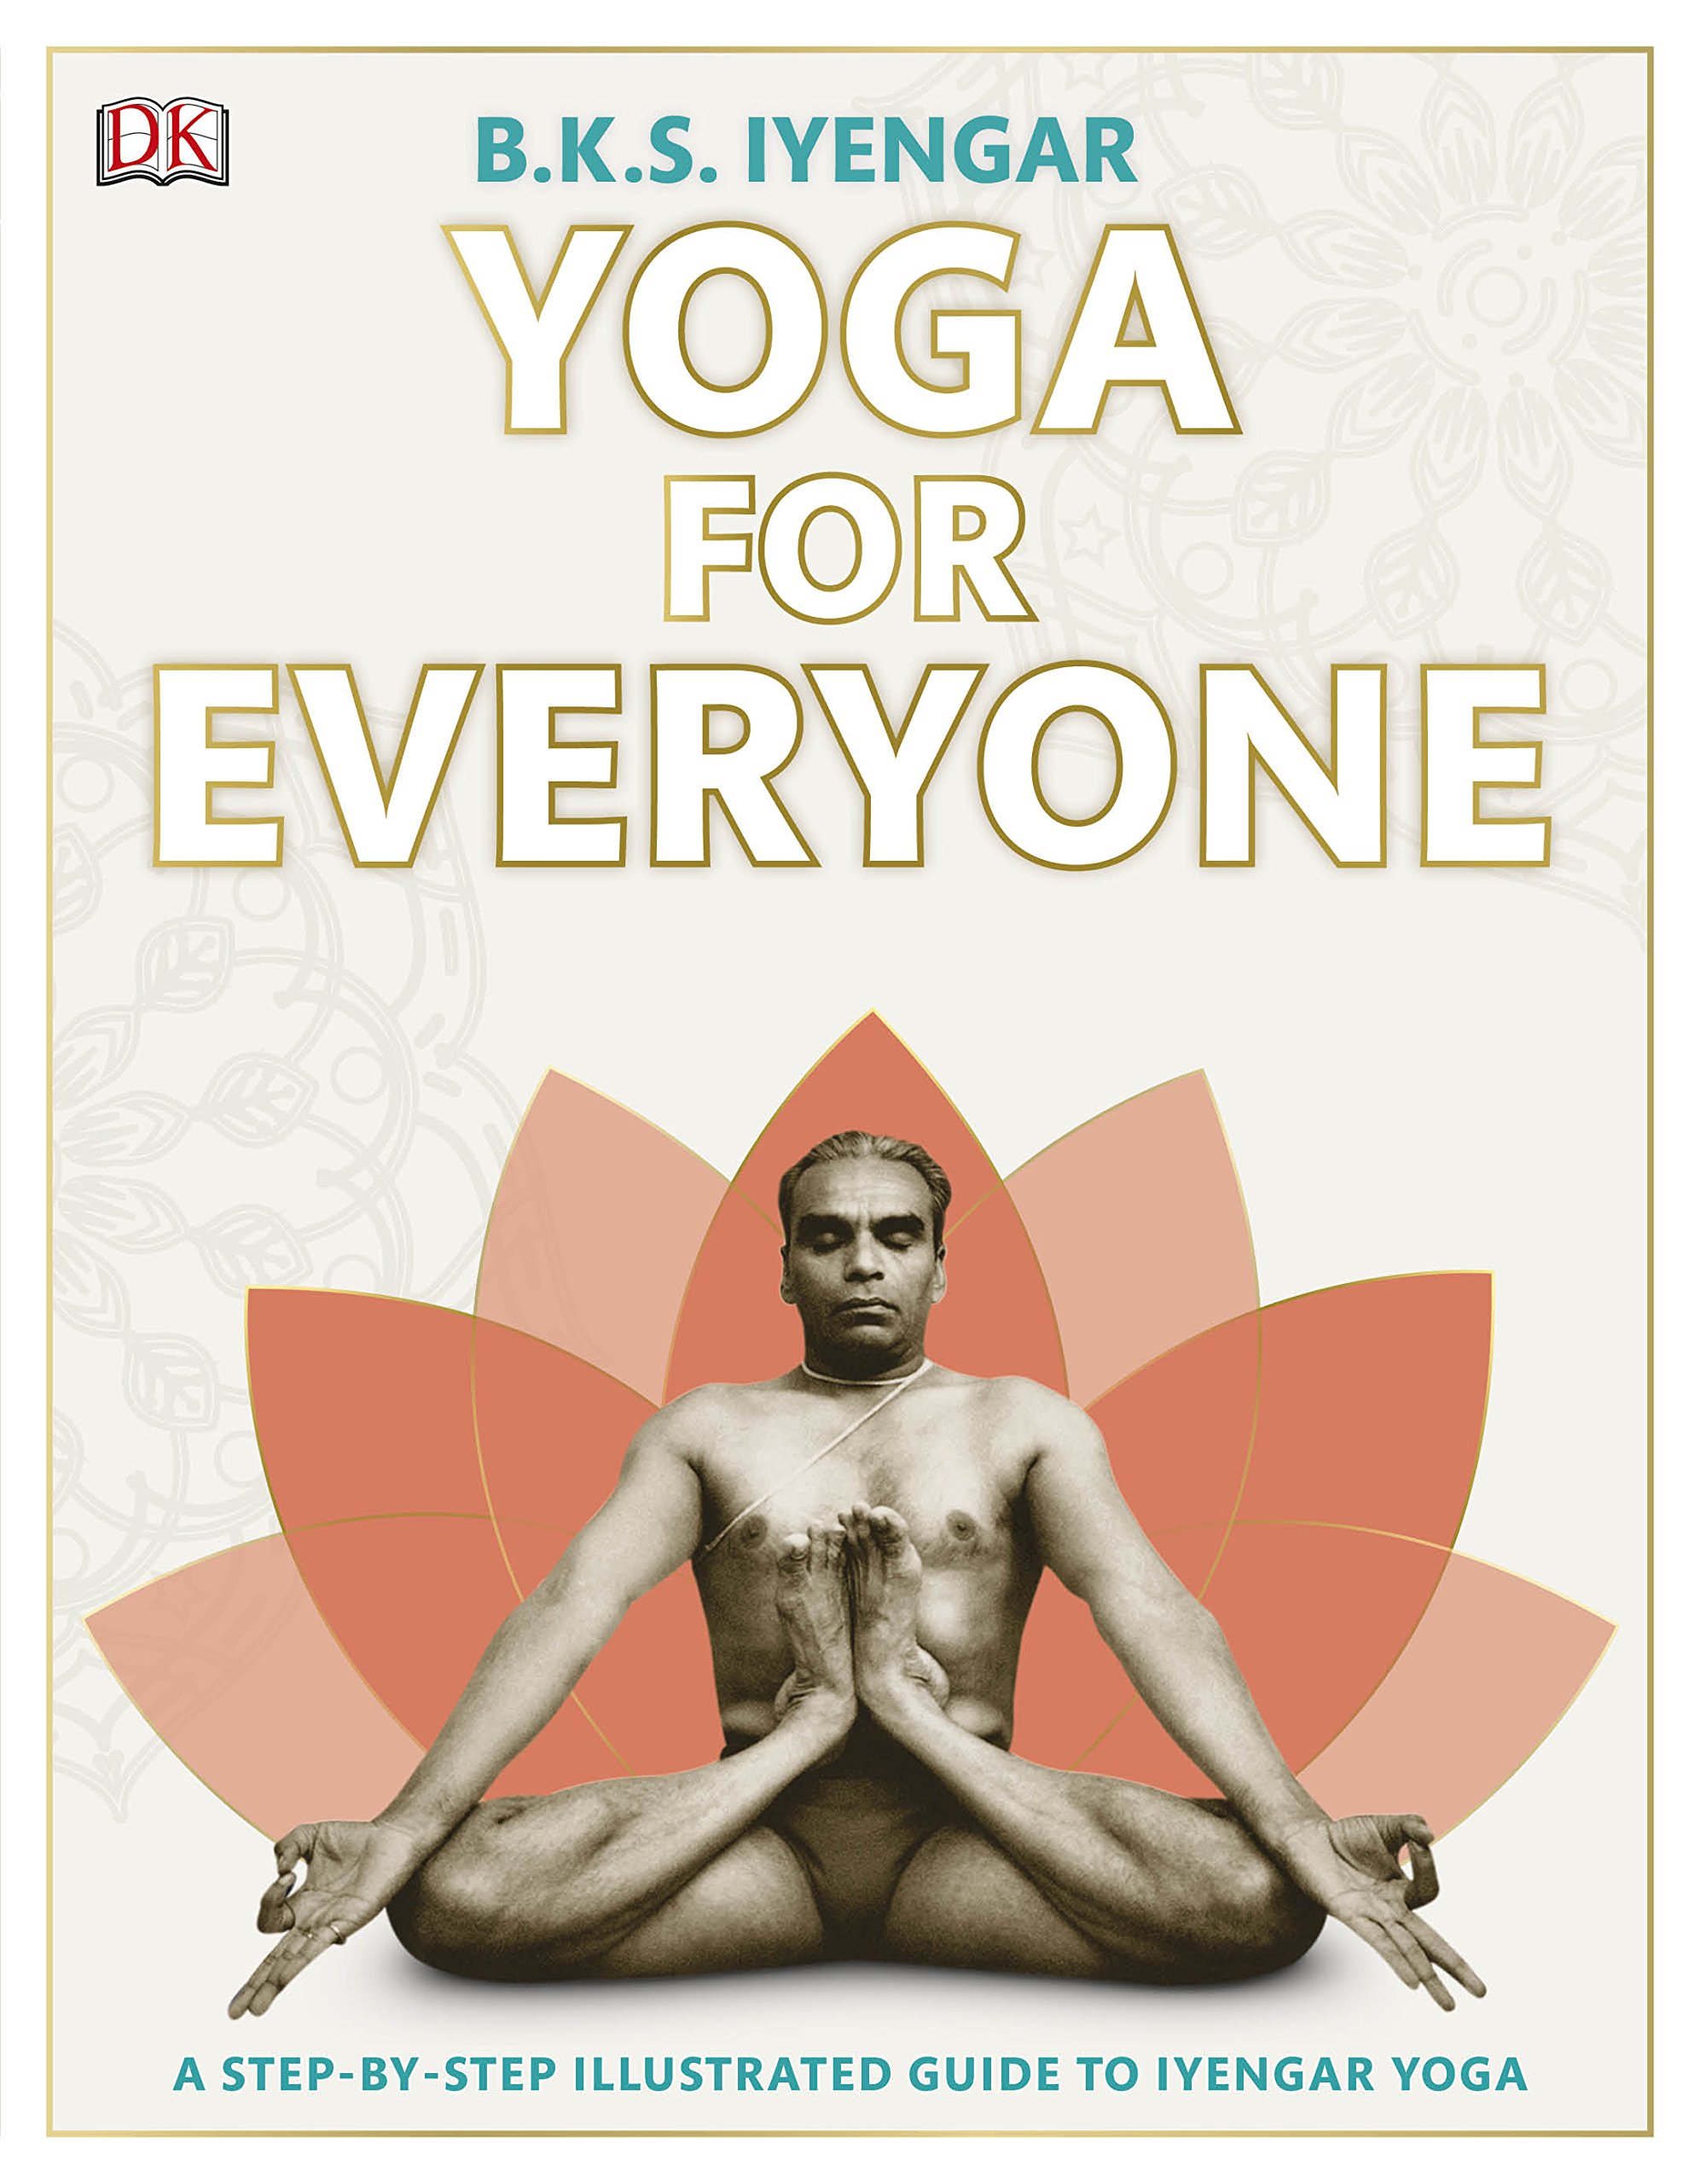 Yoga for Everyone A Step-by-Step Illustrated Guide to Iyengar Yoga-CLASSIBLOGGER